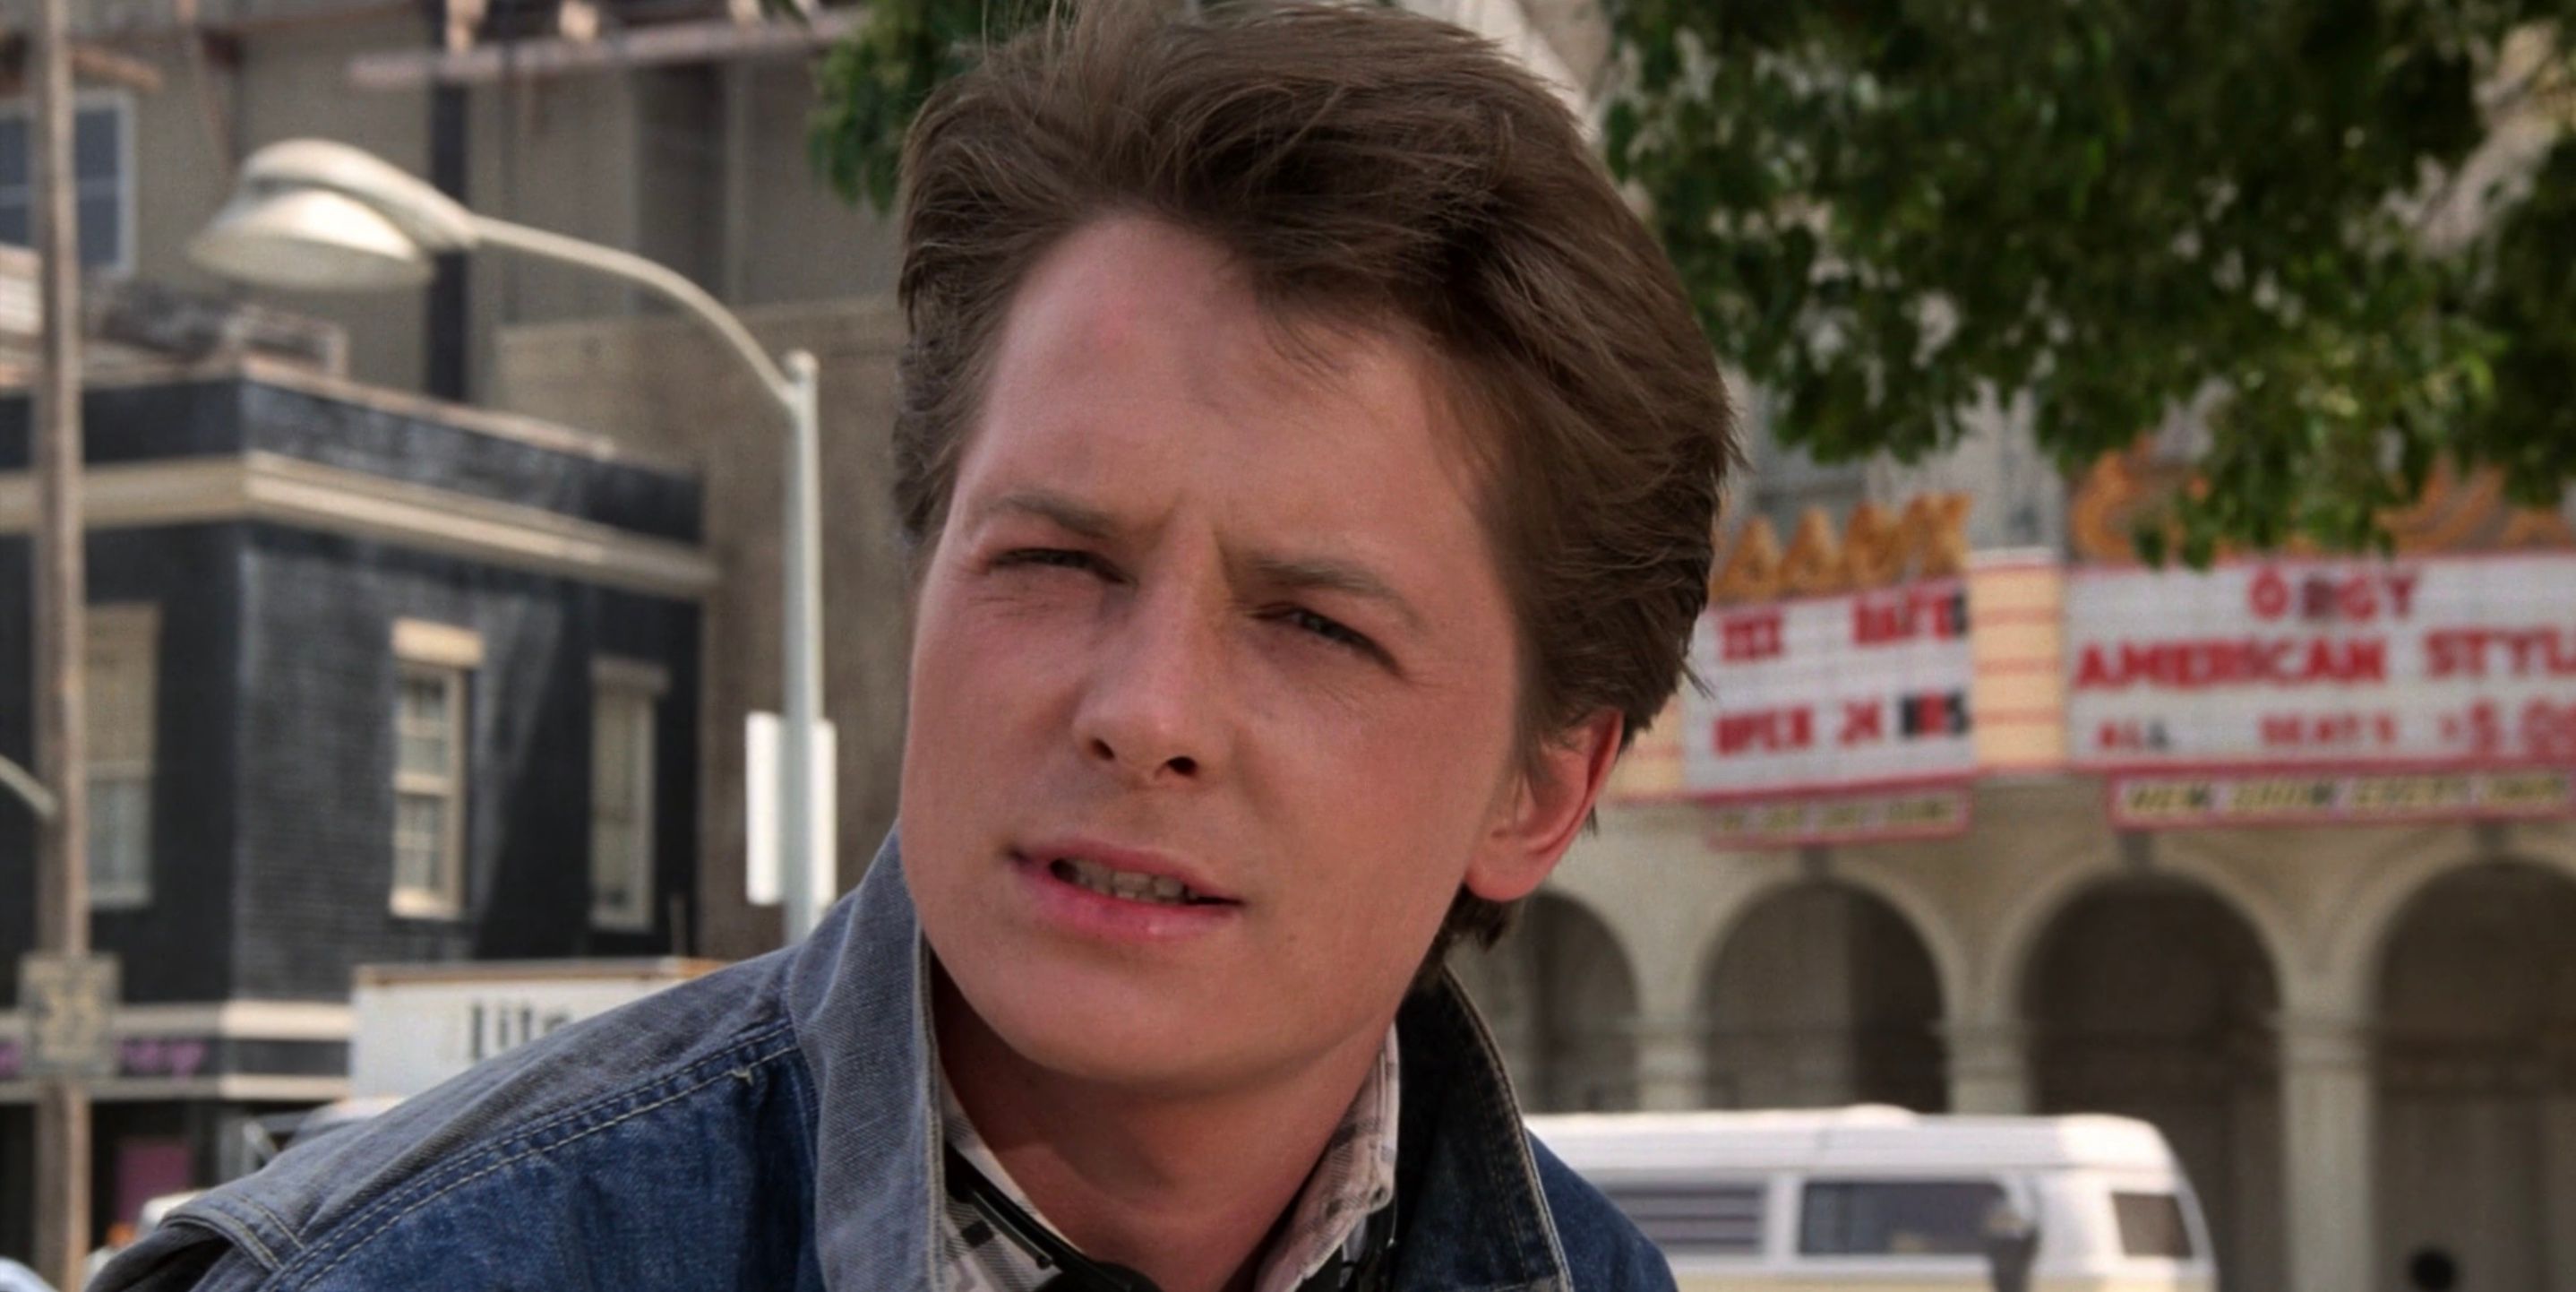 Marty McFly squinting and looking to the distance in Back to the Future.